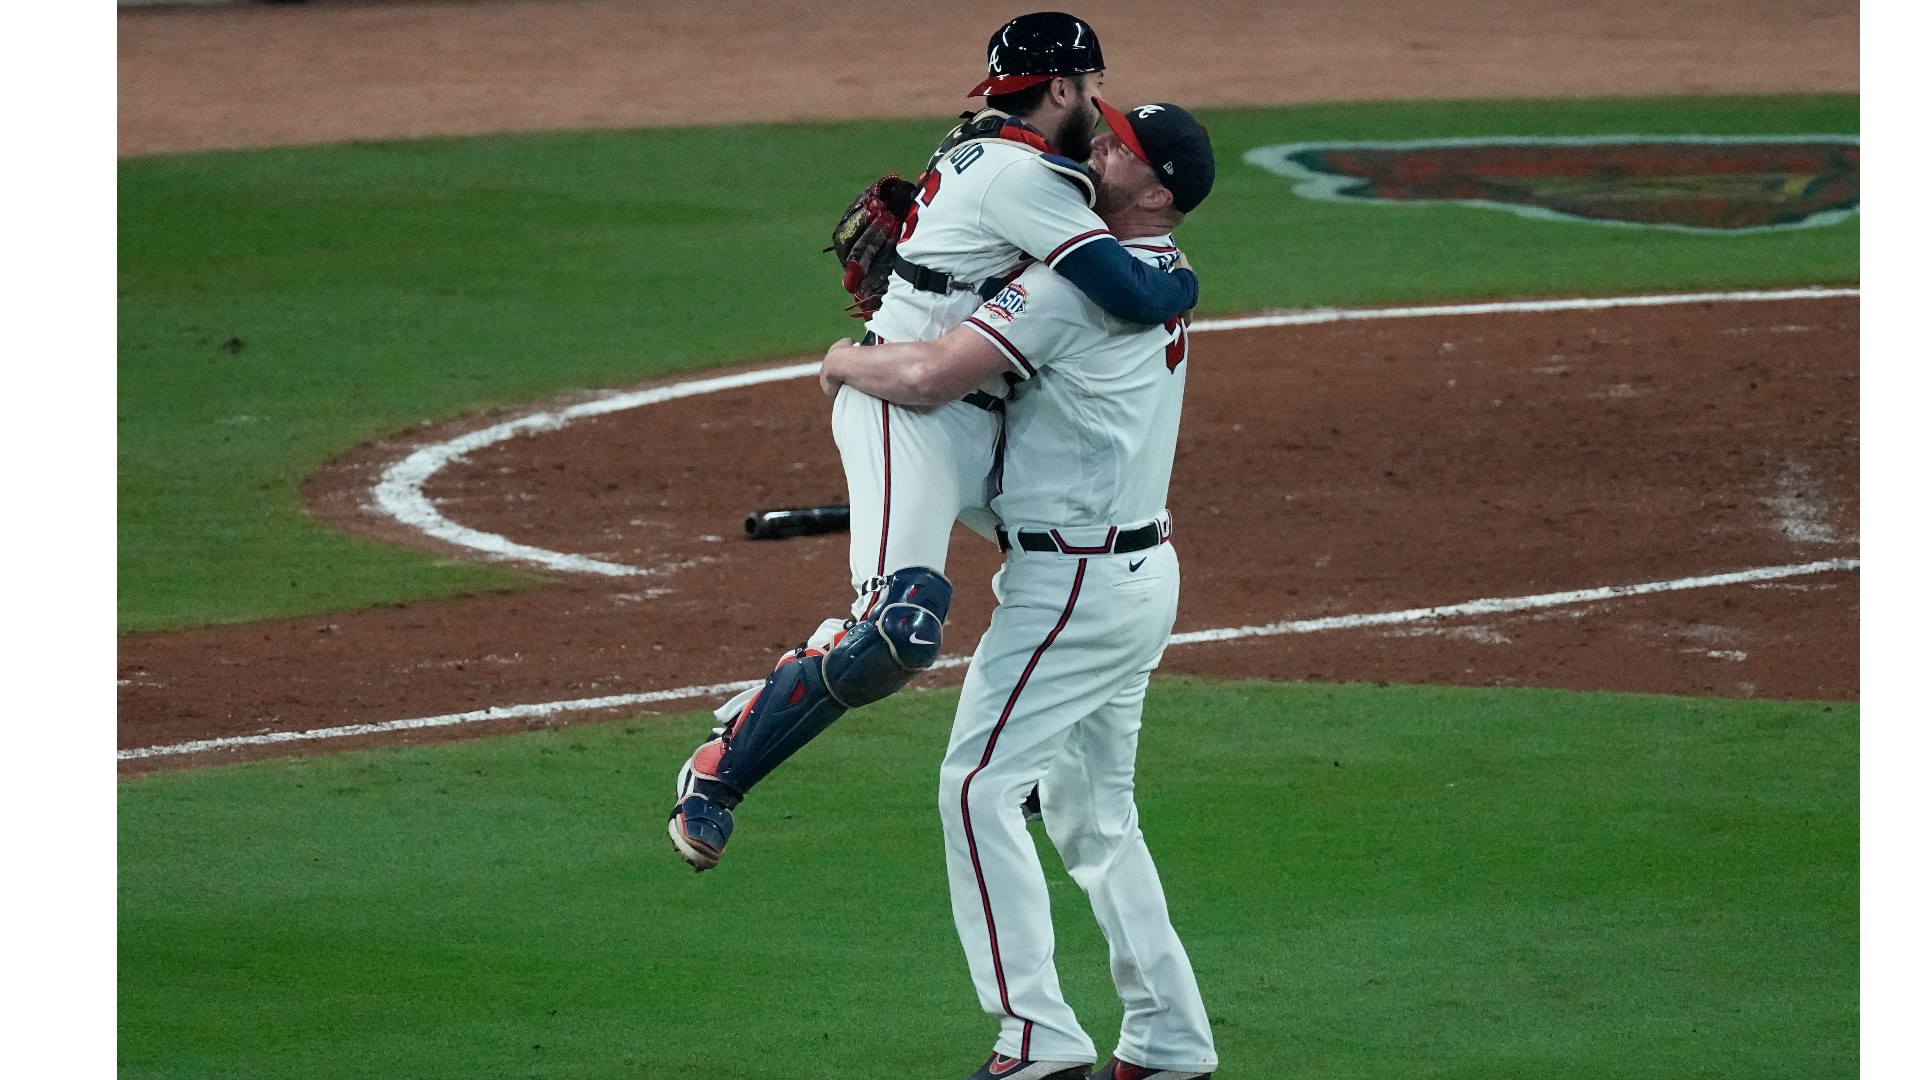 The Braves beat the Dodgers in Game 6 of the NLCS on Saturday night.